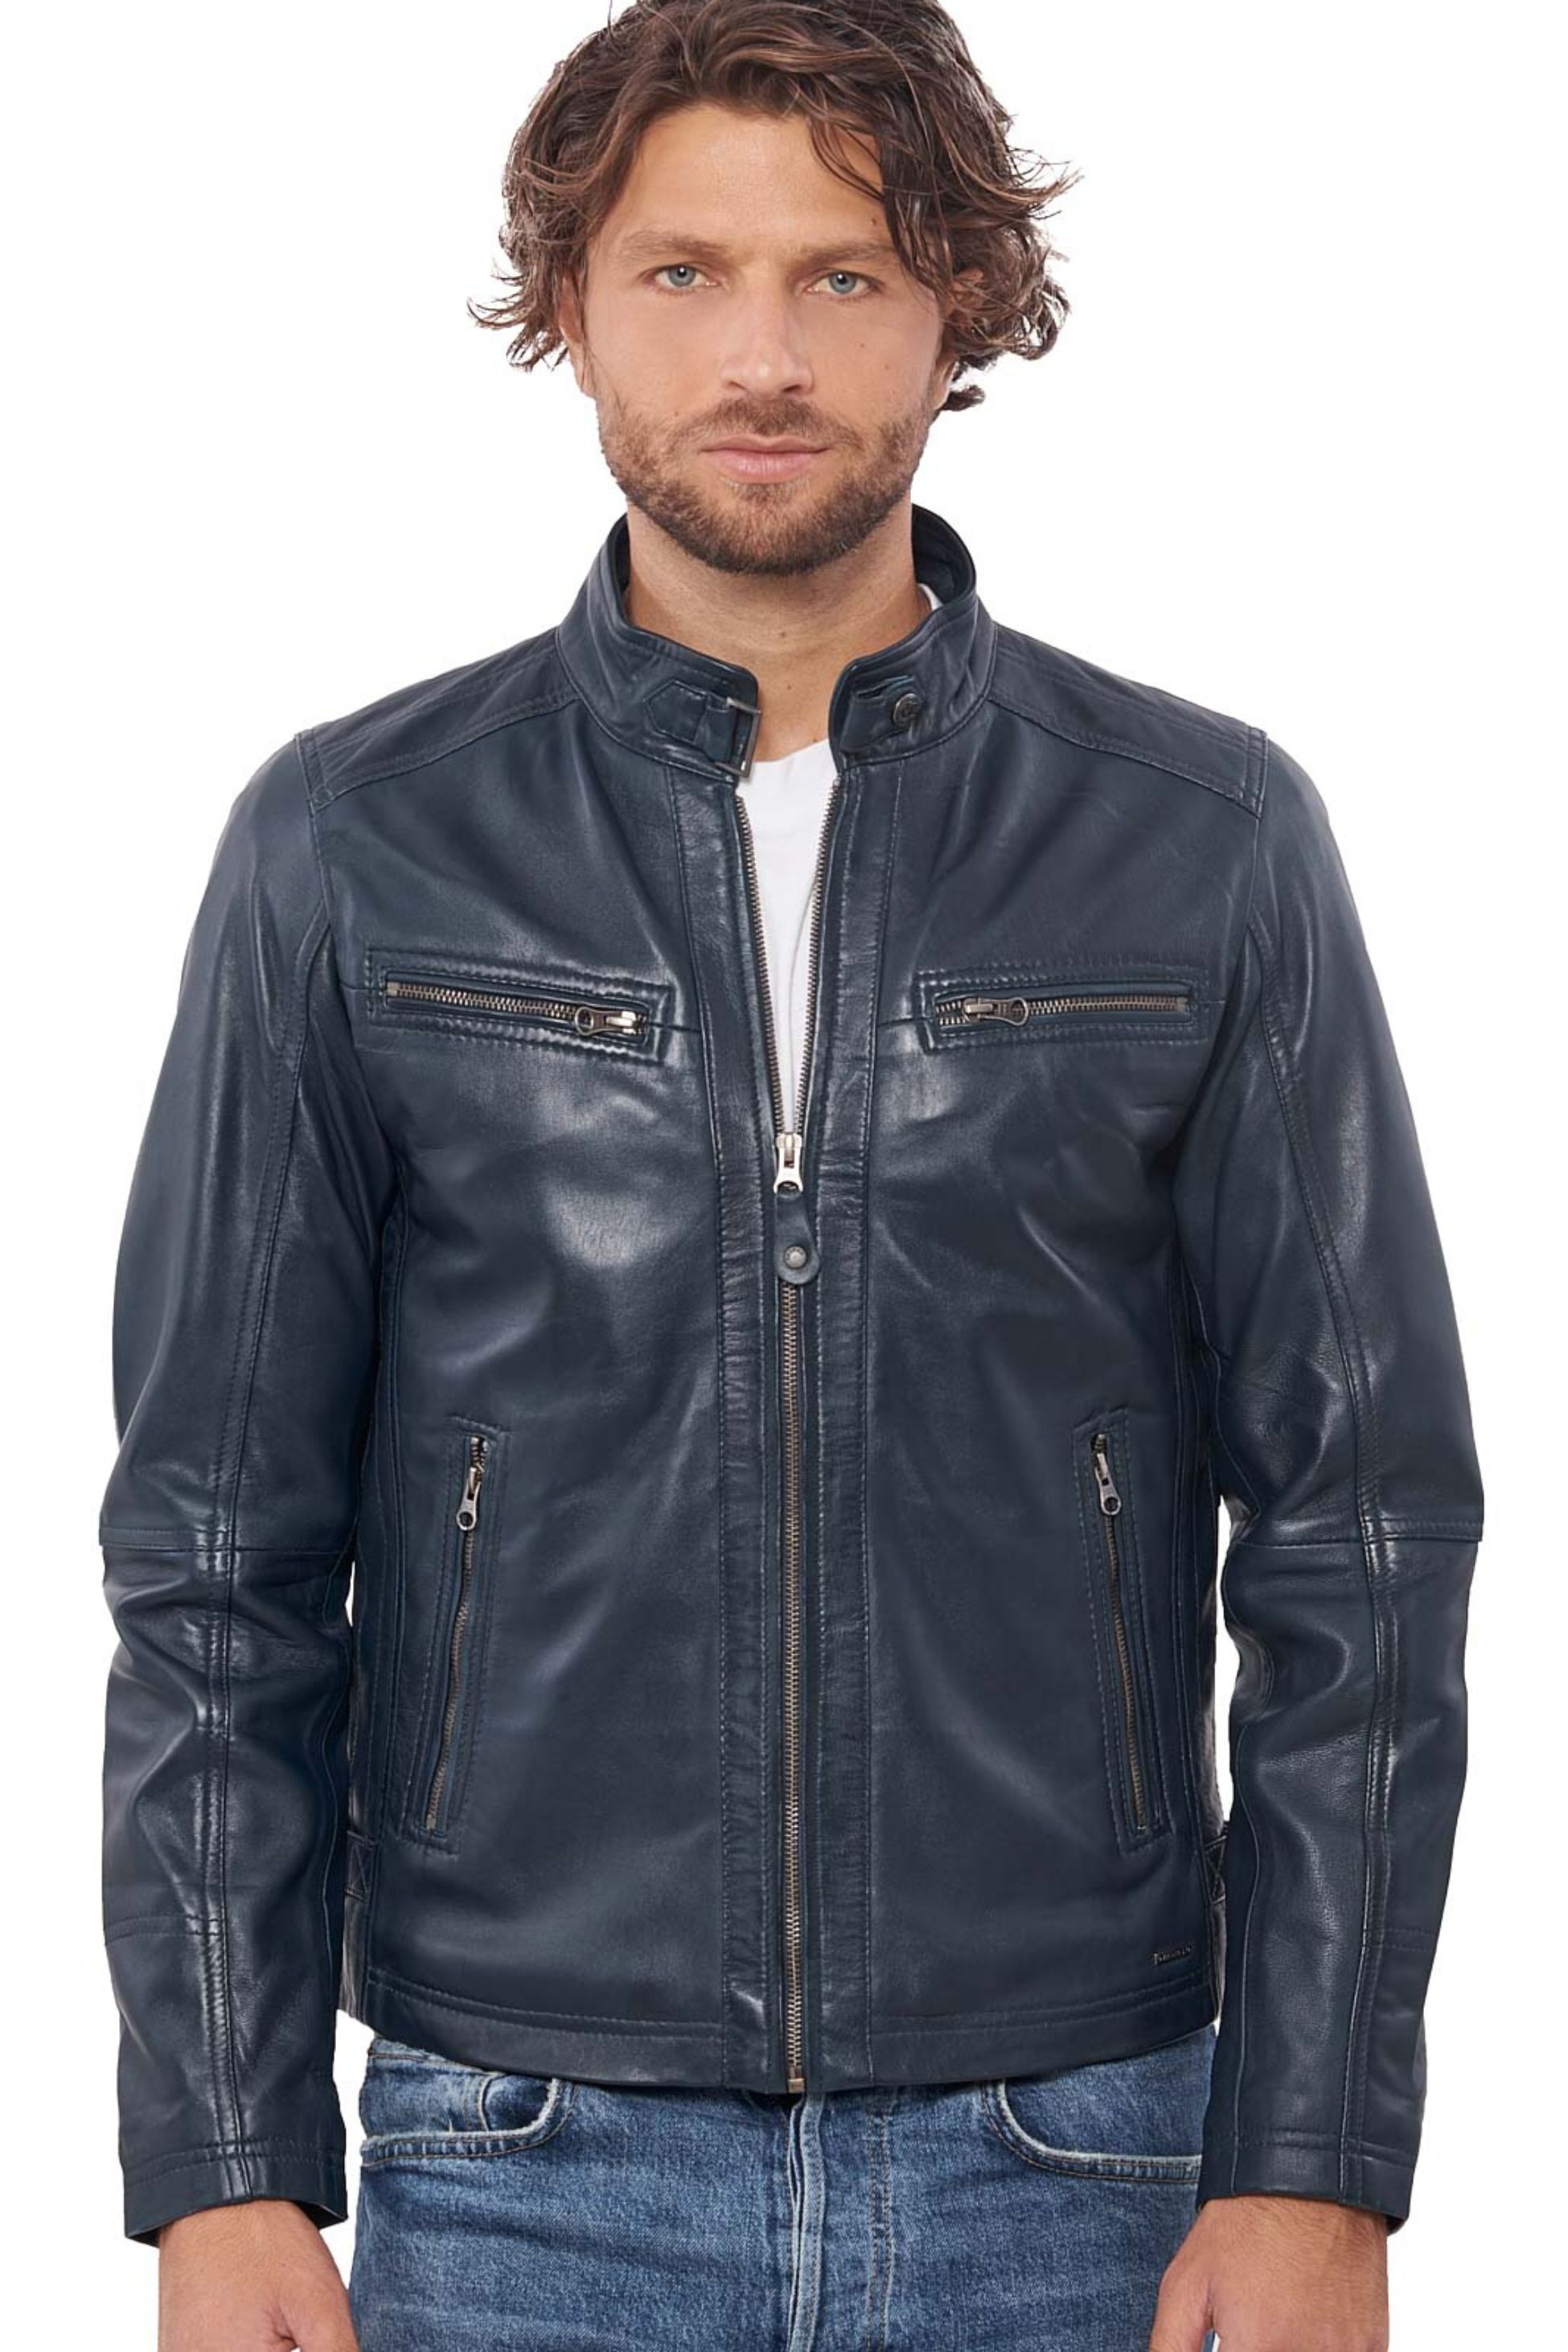 ALPHA SHEEP BLUE - AUTHENTIC MENS LEATHER JACKET